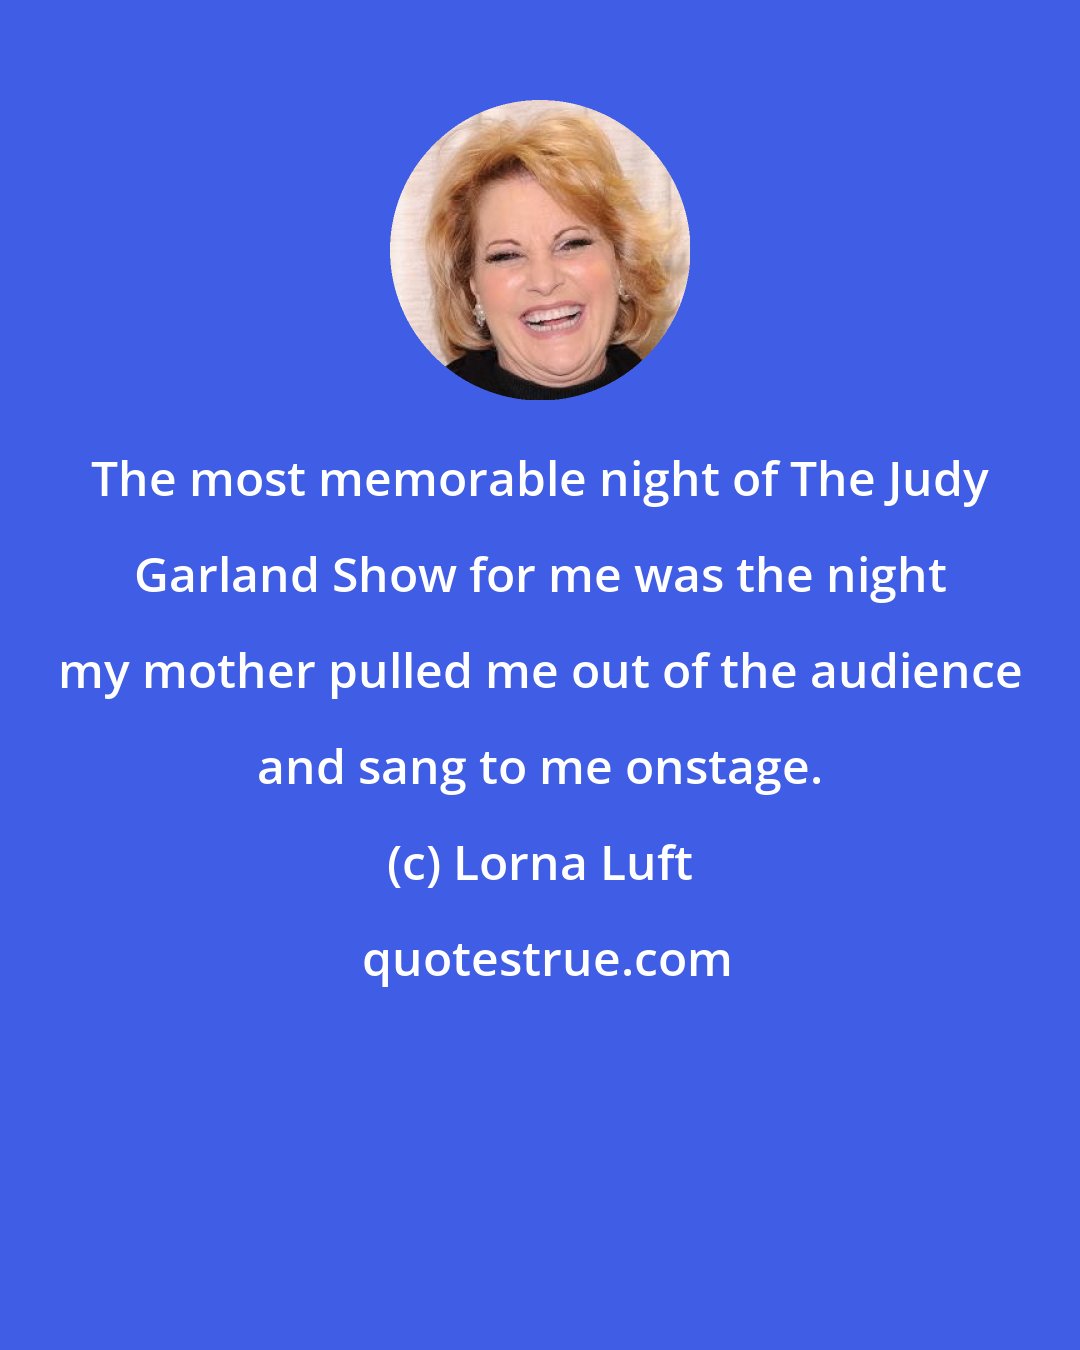 Lorna Luft: The most memorable night of The Judy Garland Show for me was the night my mother pulled me out of the audience and sang to me onstage.